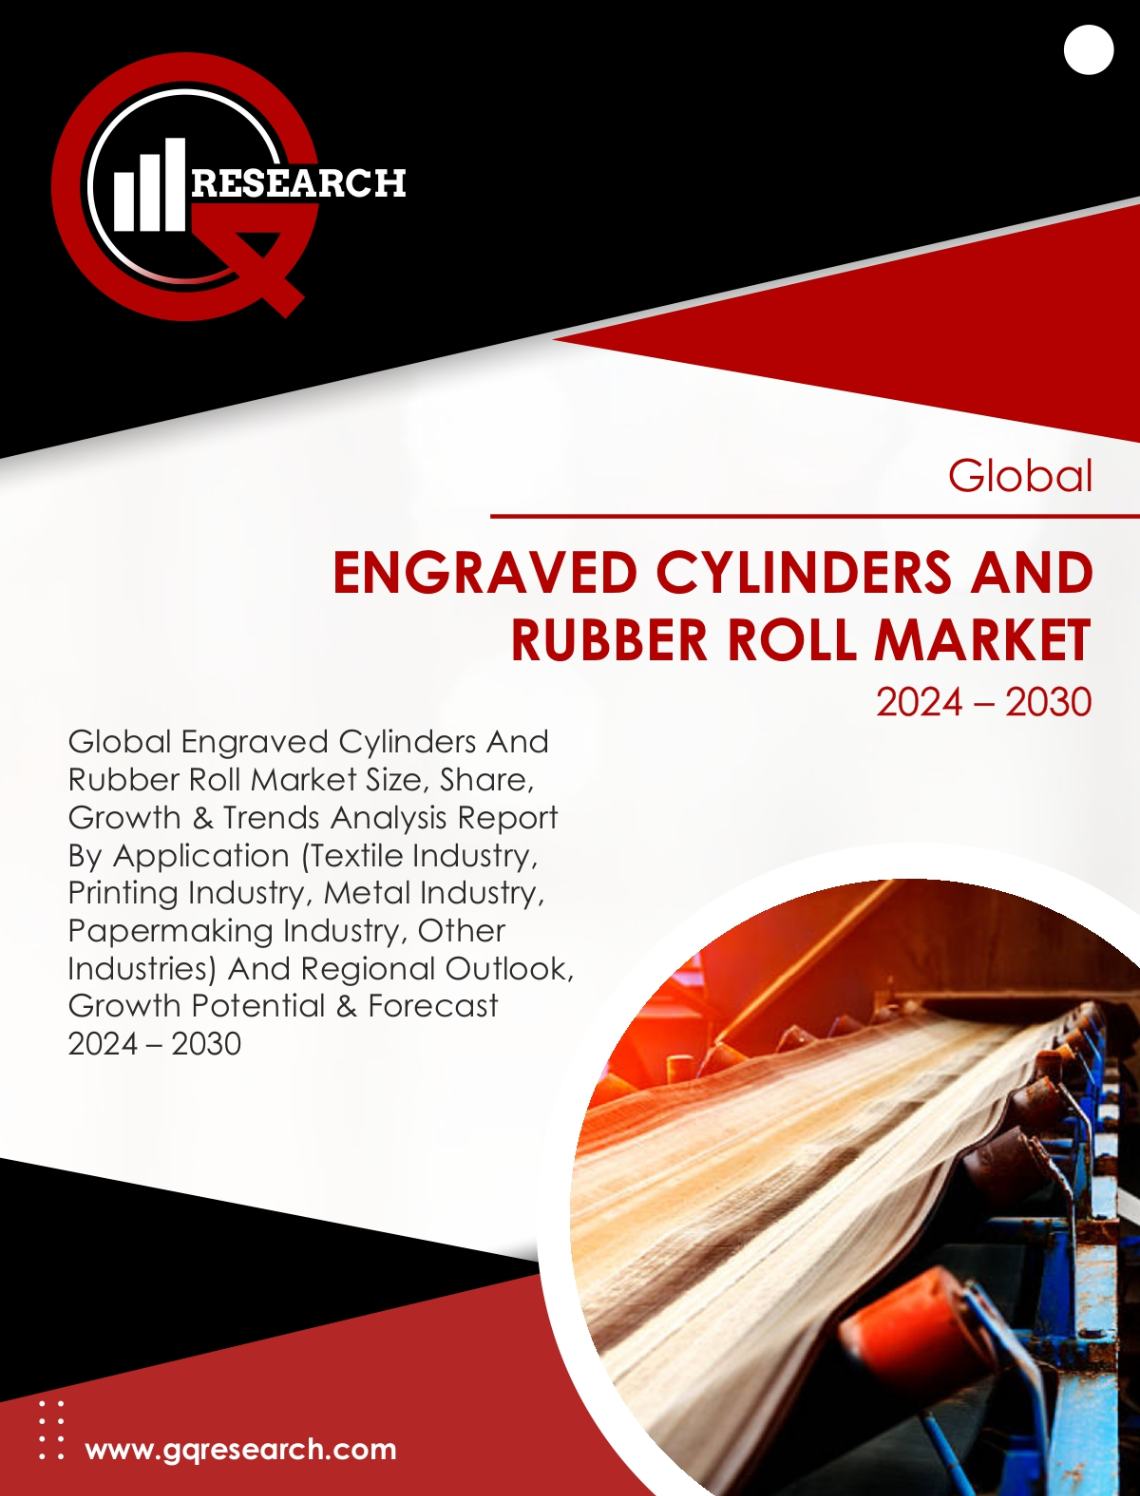 Engraved Cylinders And Rubber Roll Market Size, Share, Growth & Forecast to 2030 | GQ Research